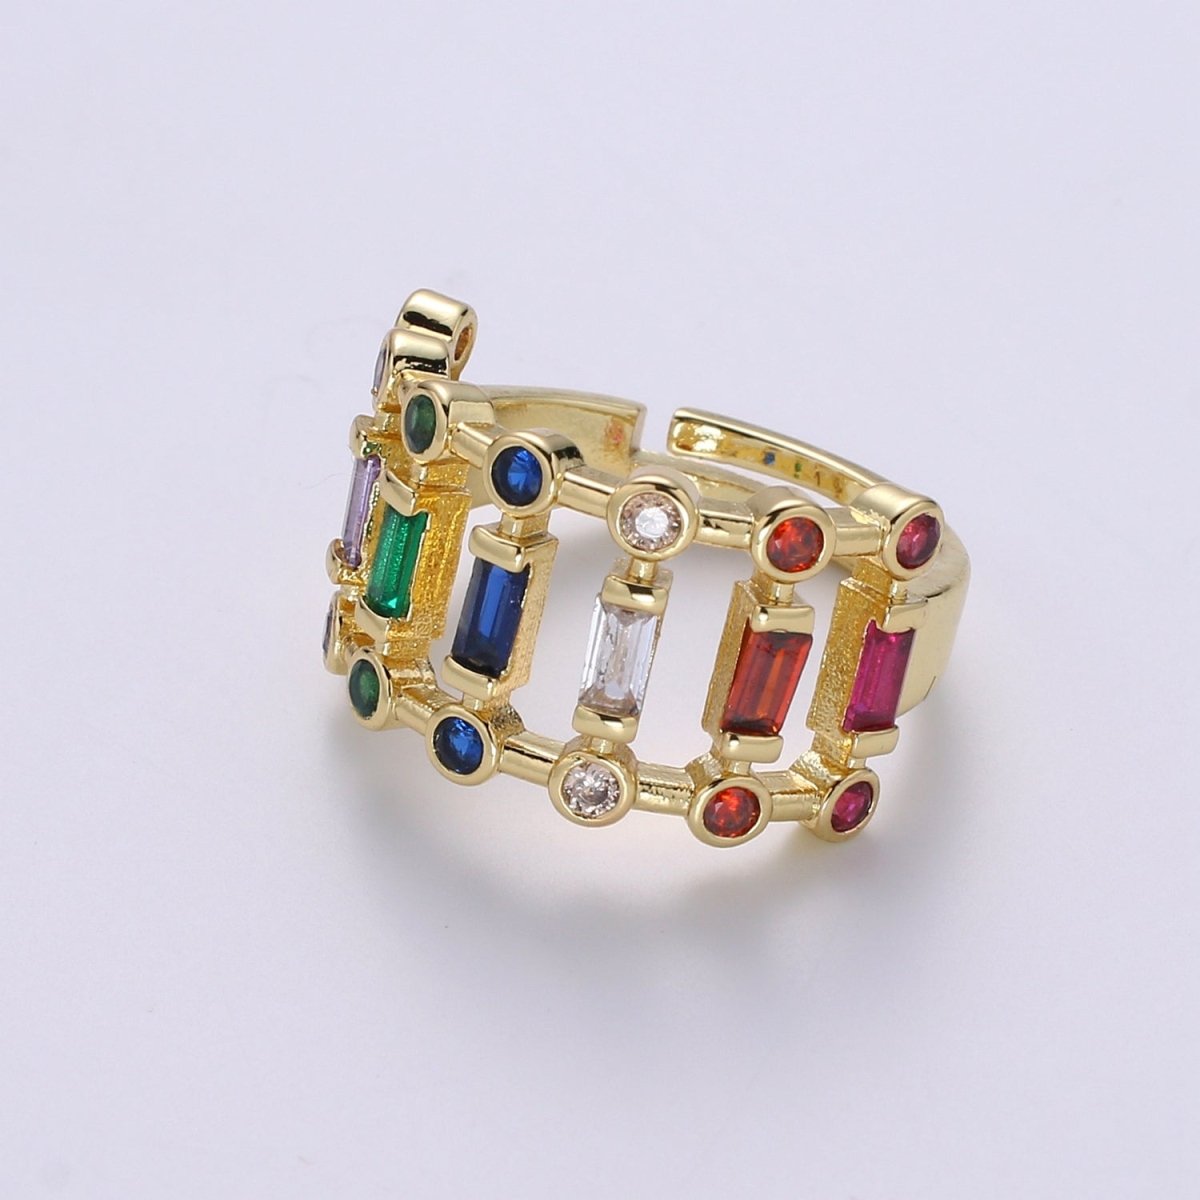 Chunky Baguette Ring, Rainbow Gold Baguette Ring, Colorful Baguette Ring, Multi Color Adjustable Ring, EVeryday Wear Women Ring O-296 - DLUXCA